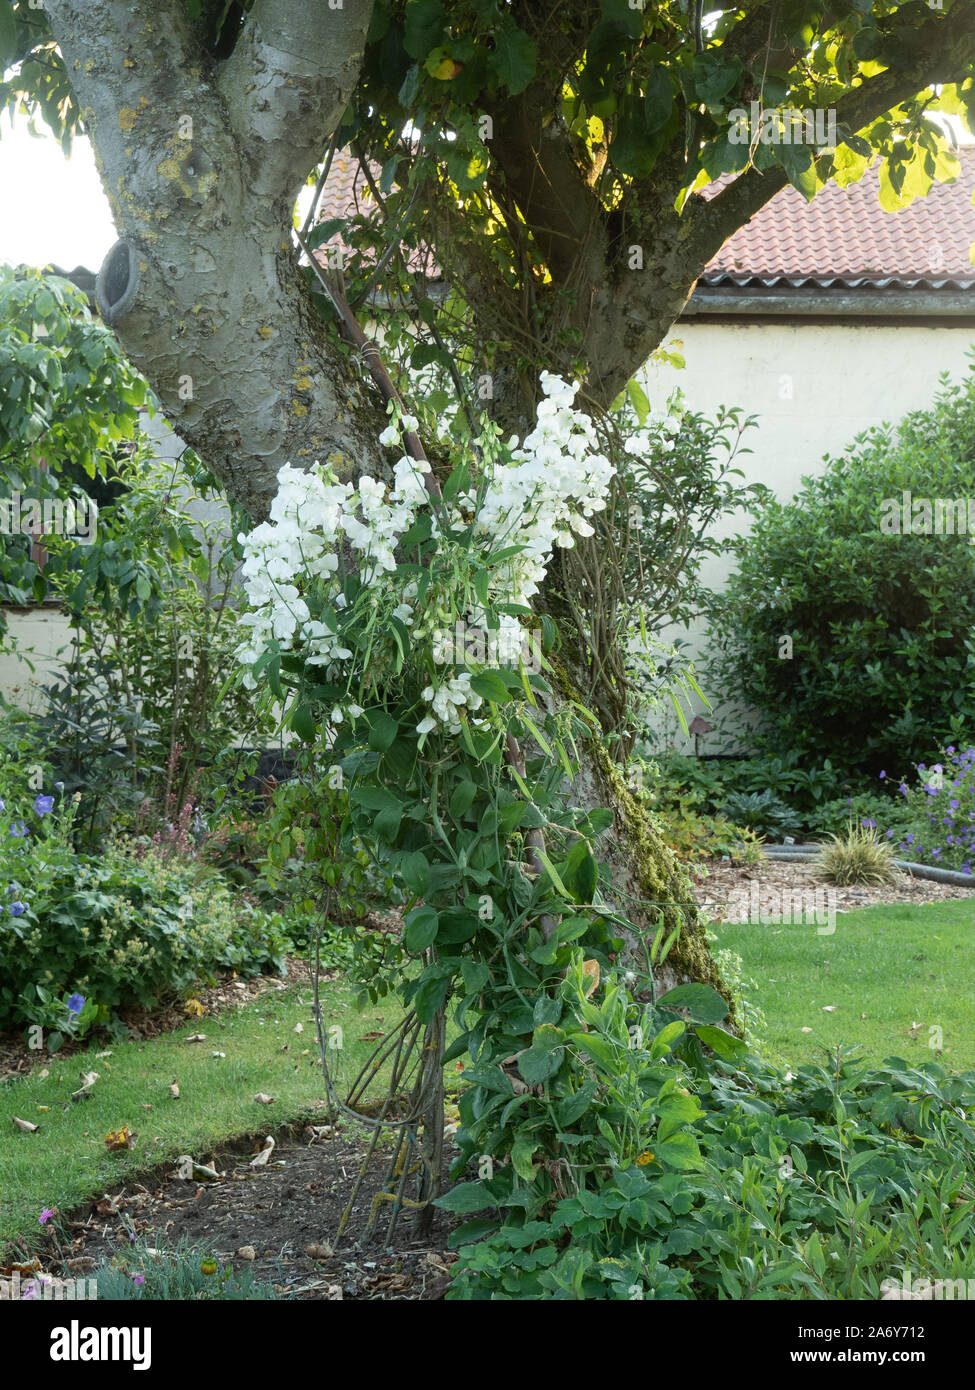 A flowering plant of the perennial sweet pea Lathyrus latifolius 'White Pearl' trained up an old apple tree Stock Photo